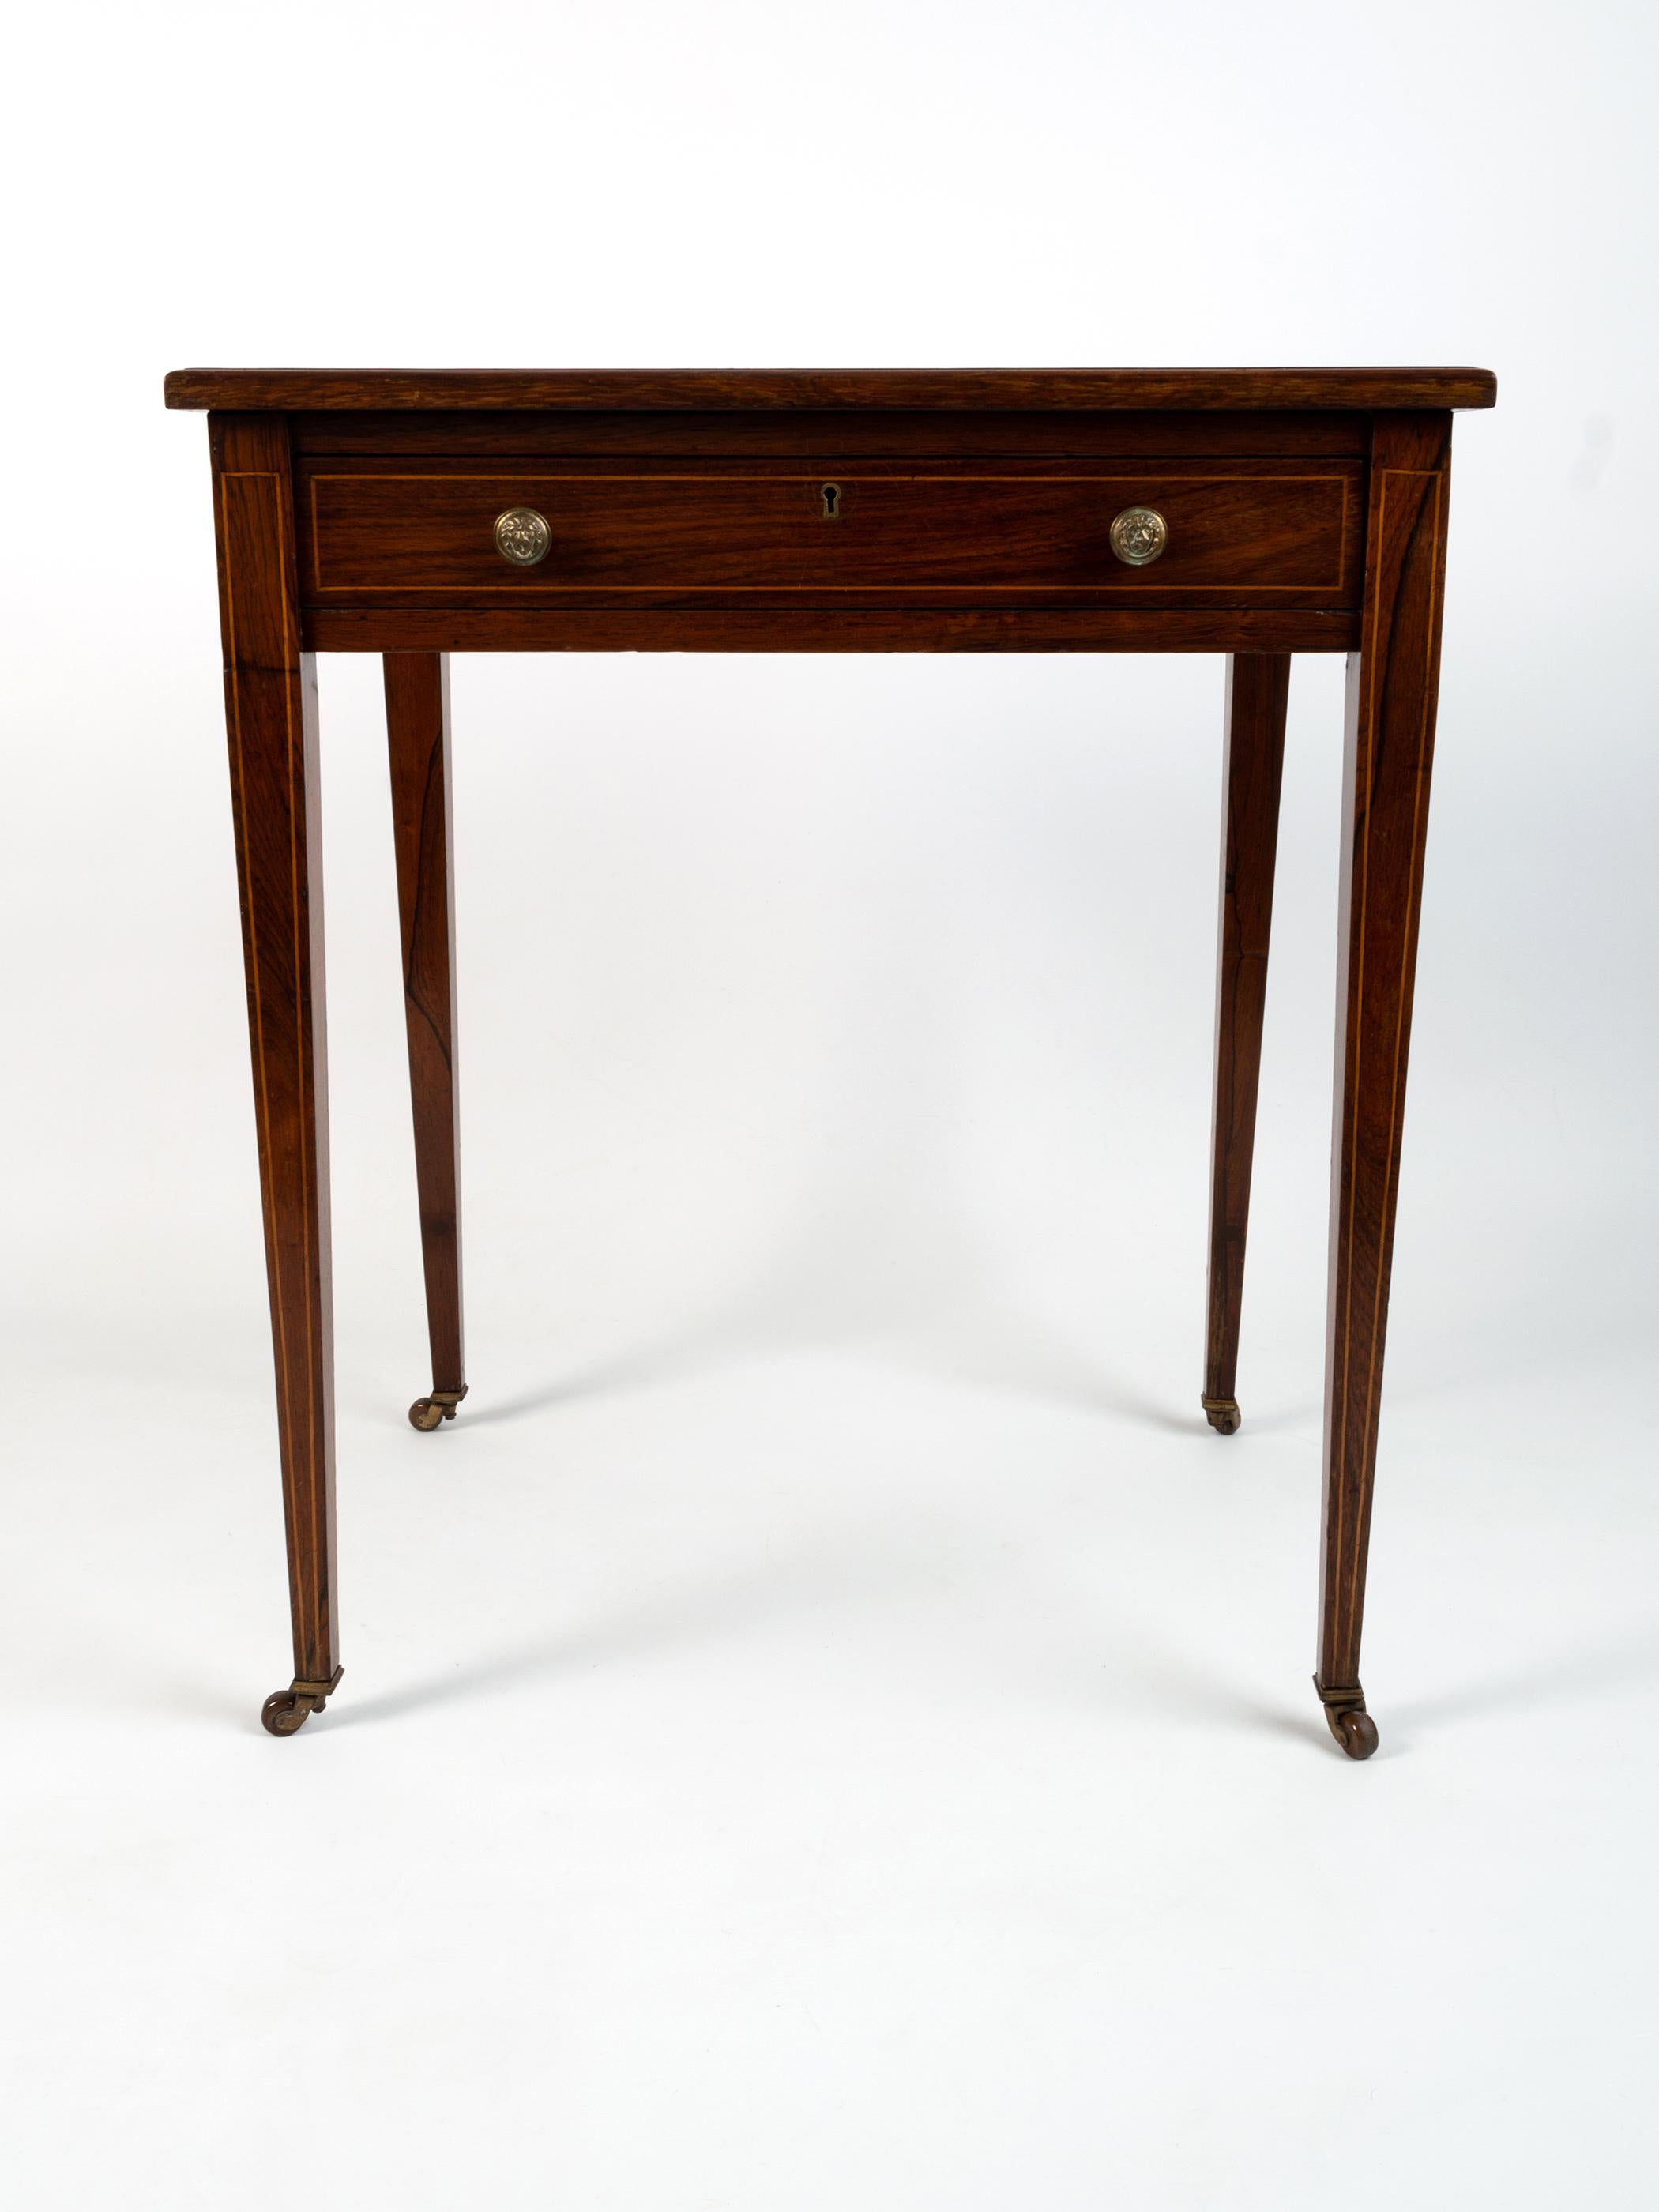 Antique English Georgian Style Rosewood Leather Inlaid Writing Table Desk C.1900 3